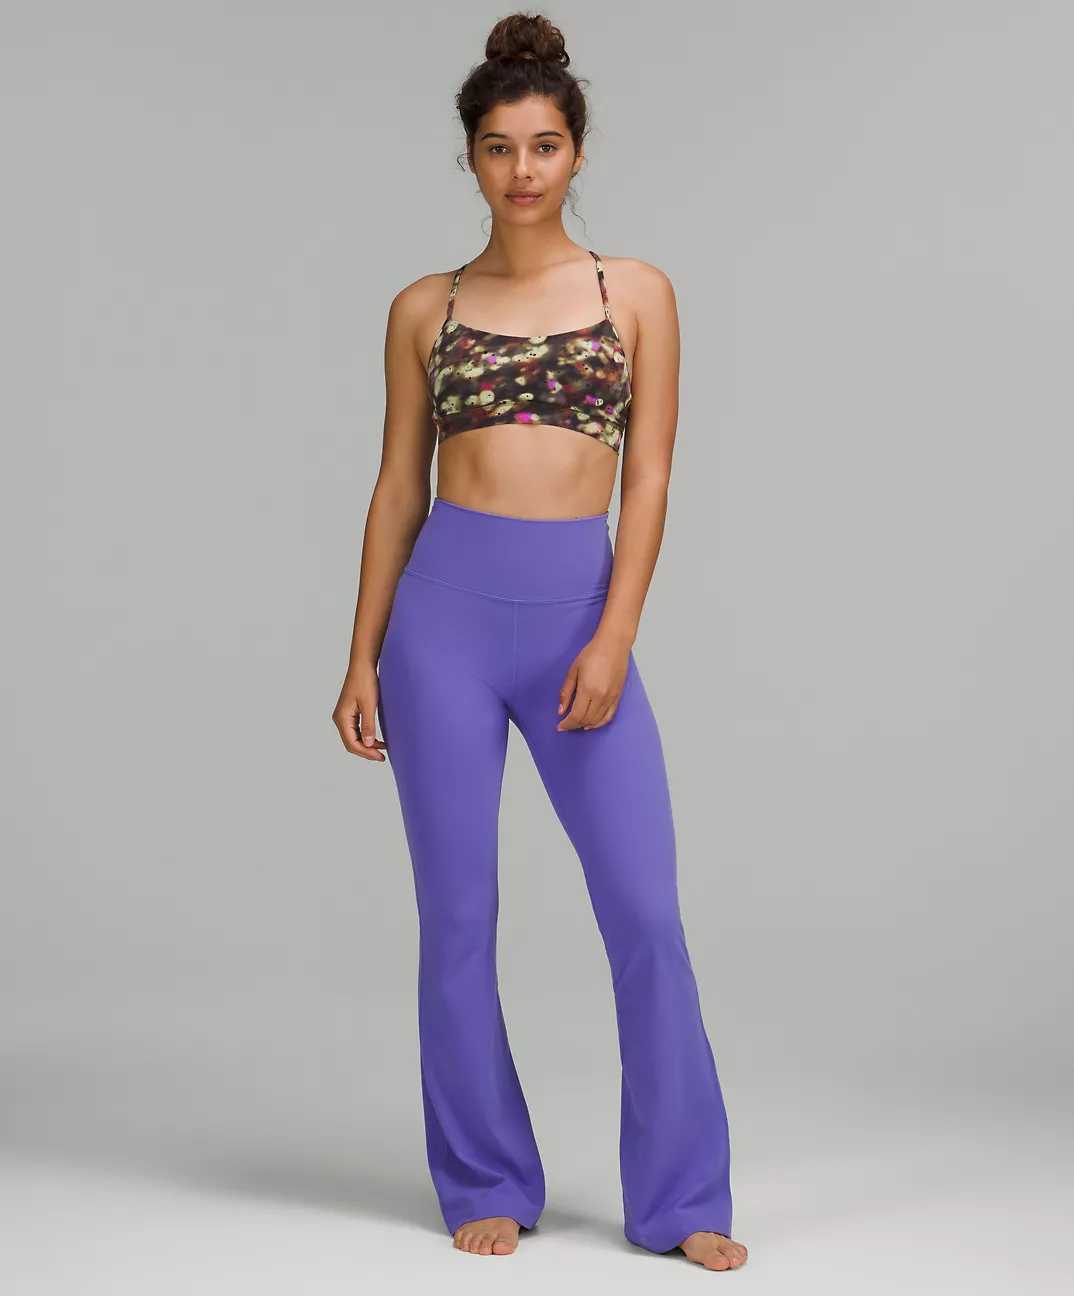 A person wearing a bralette and flared pants